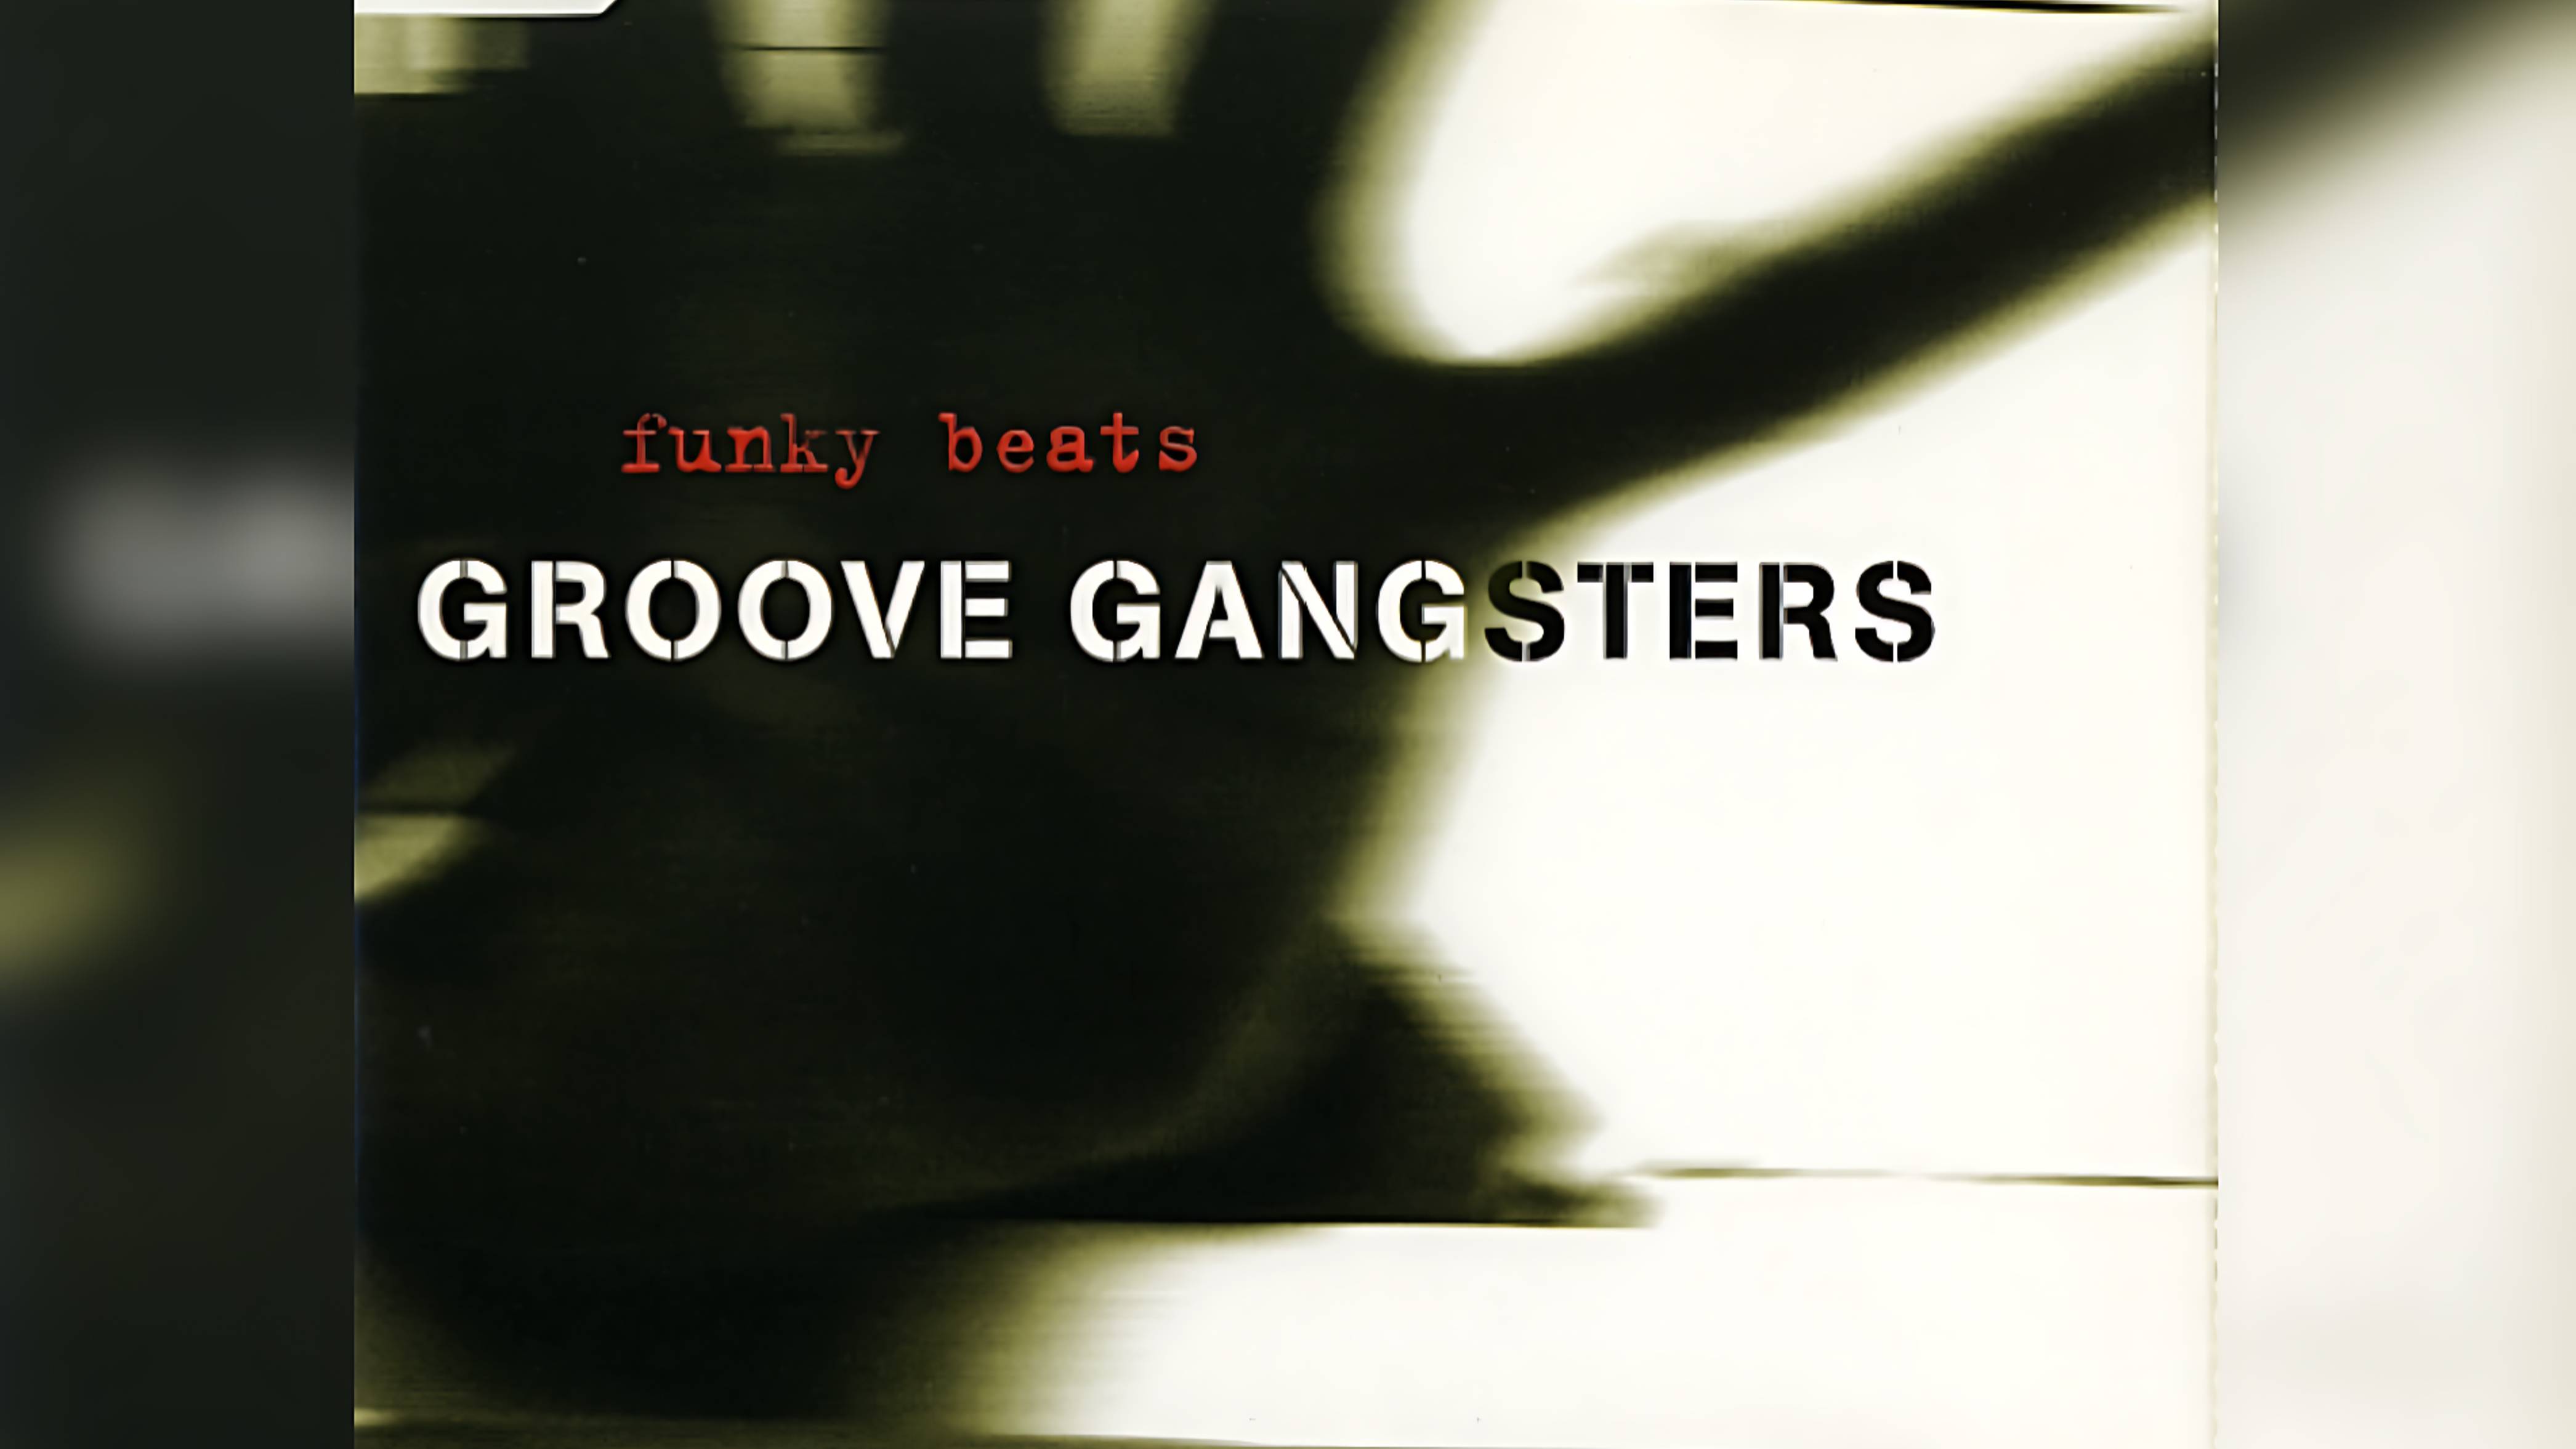 Groove Gangsters - Funky Beats (1997)